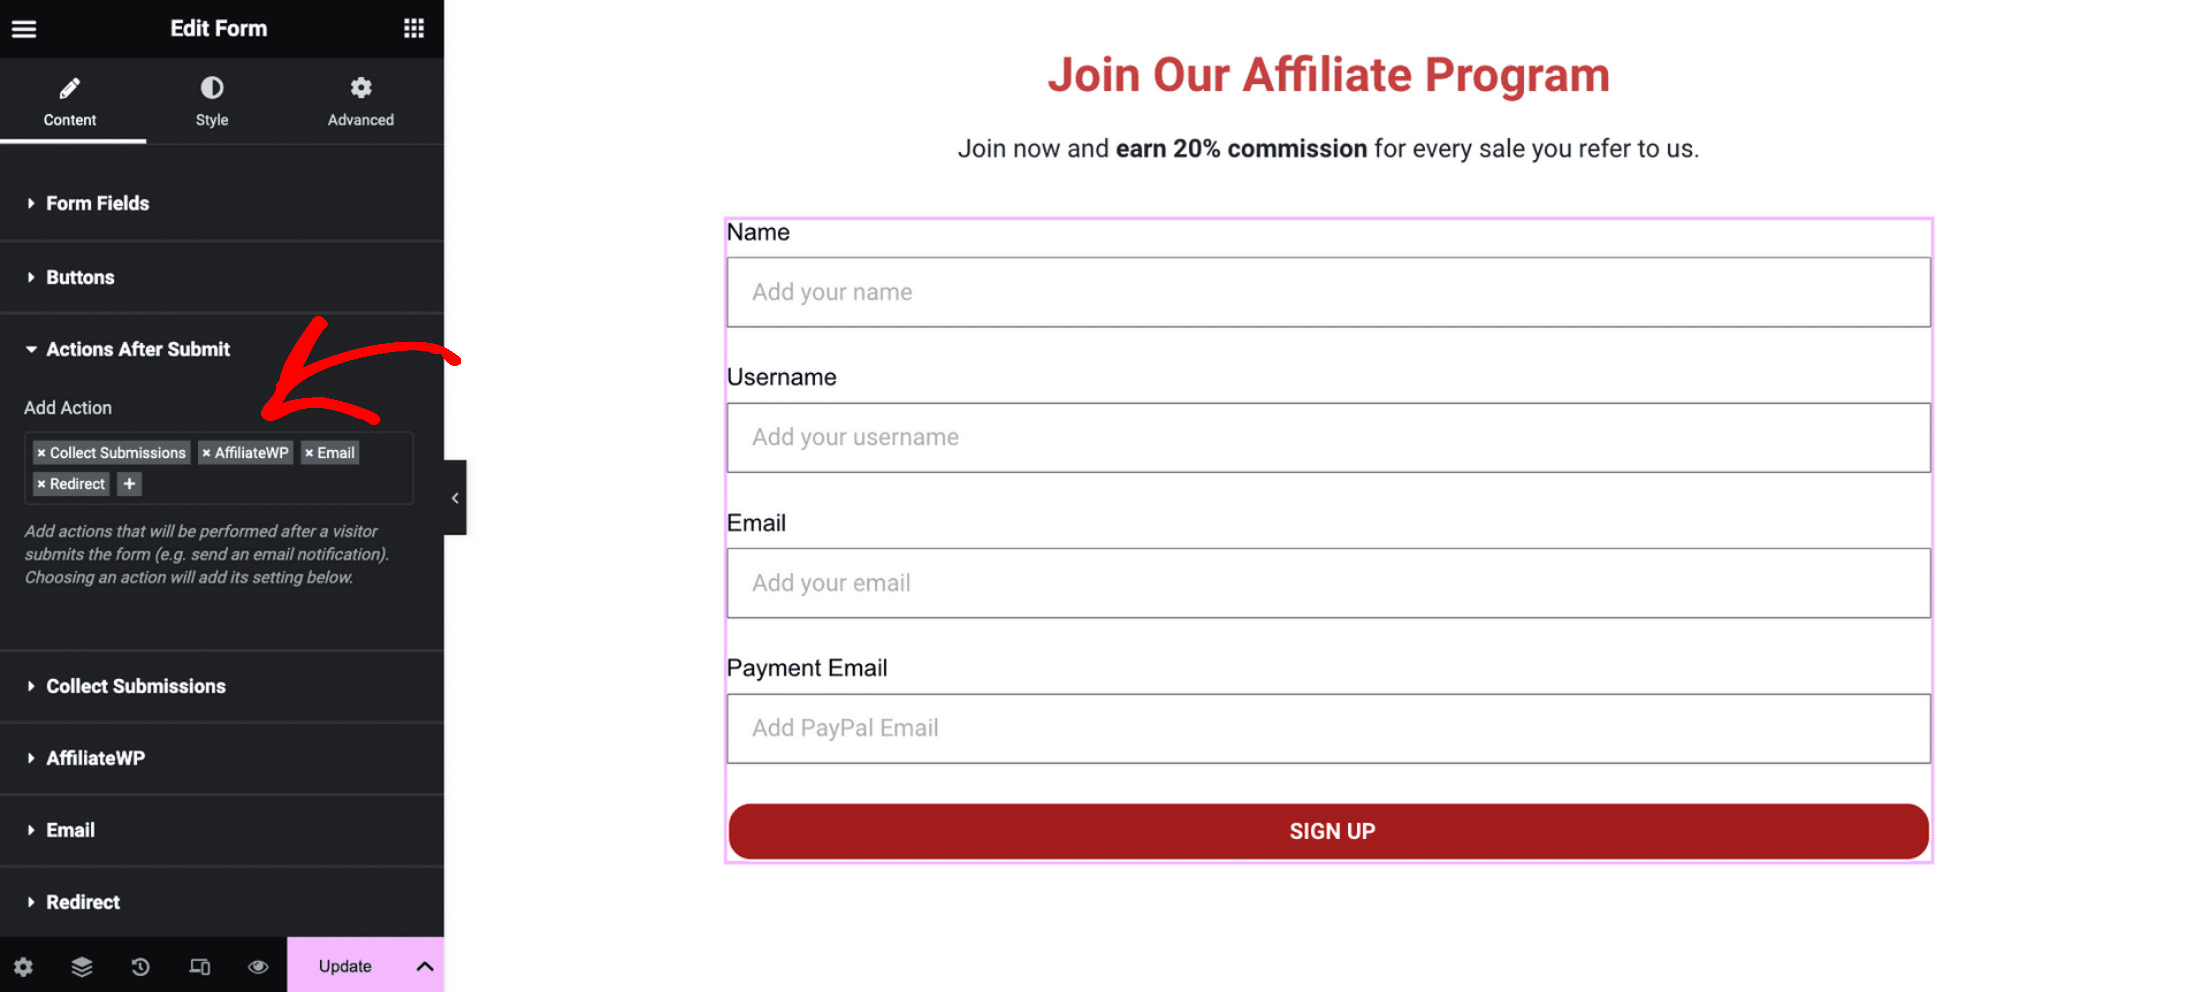 Adding the AffiliateWP action to the Actions After Submit section